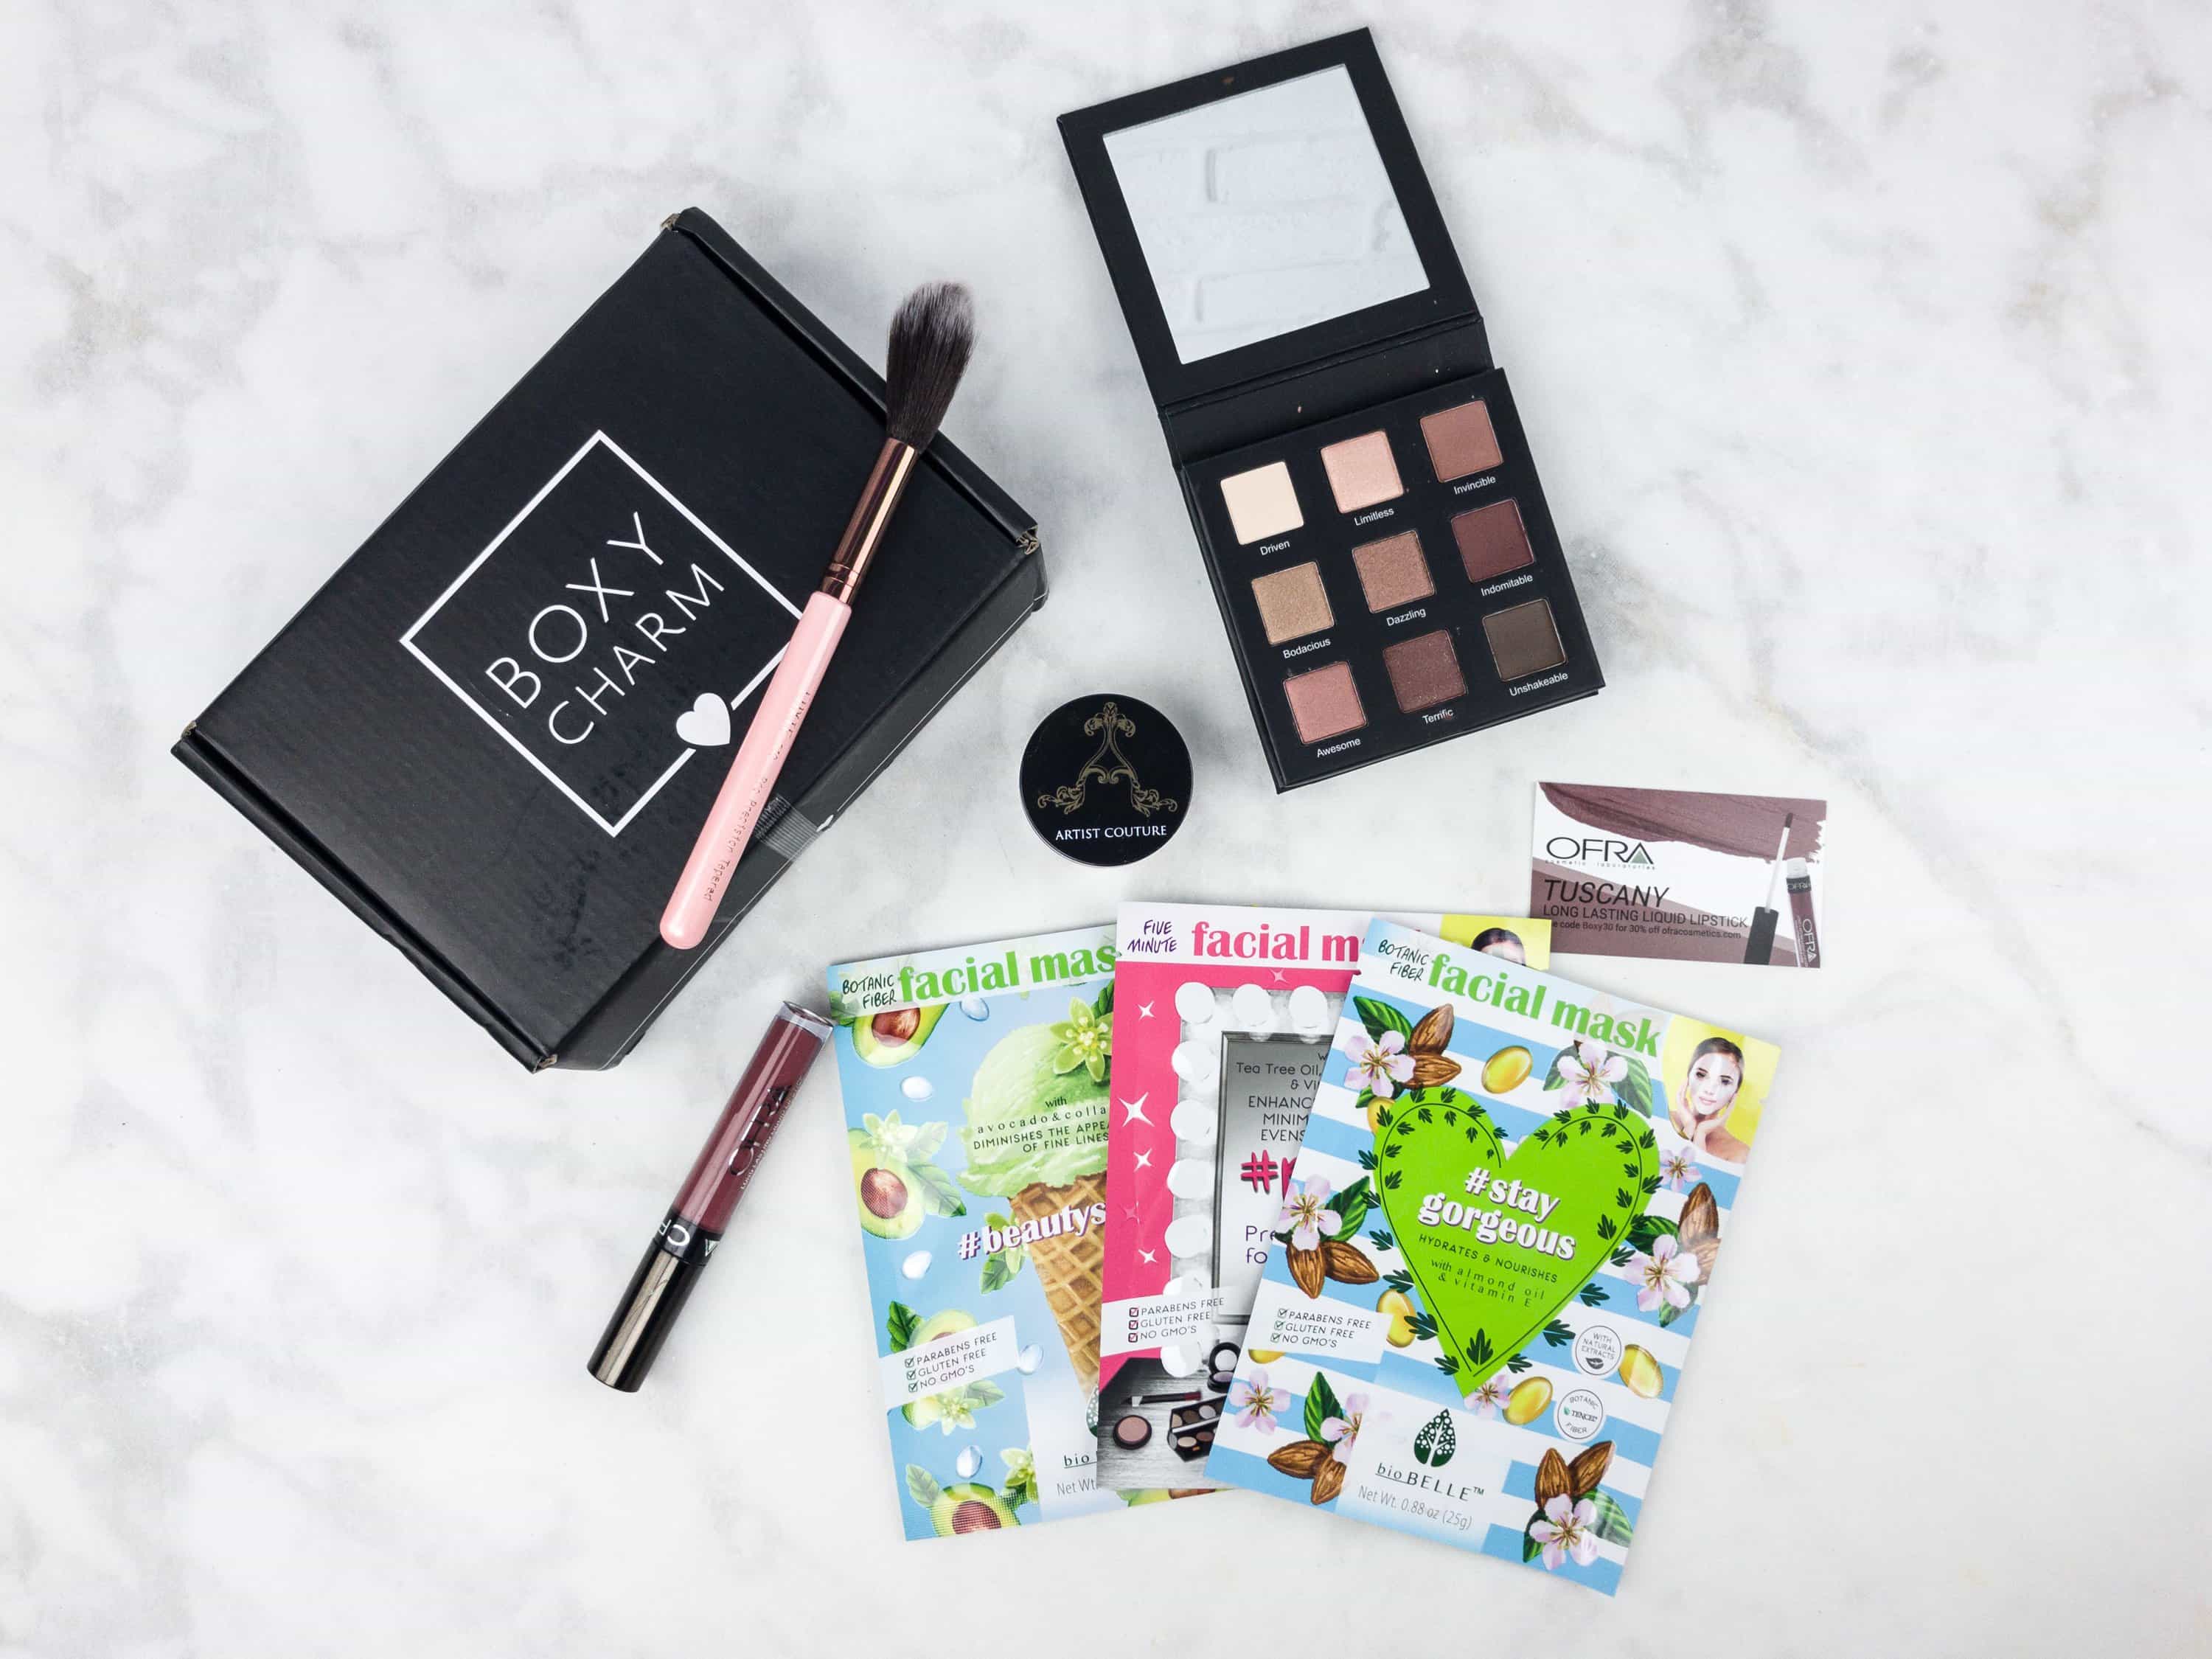 BOXYCHARM June 2017 Subscription Box Review Hello Subscription